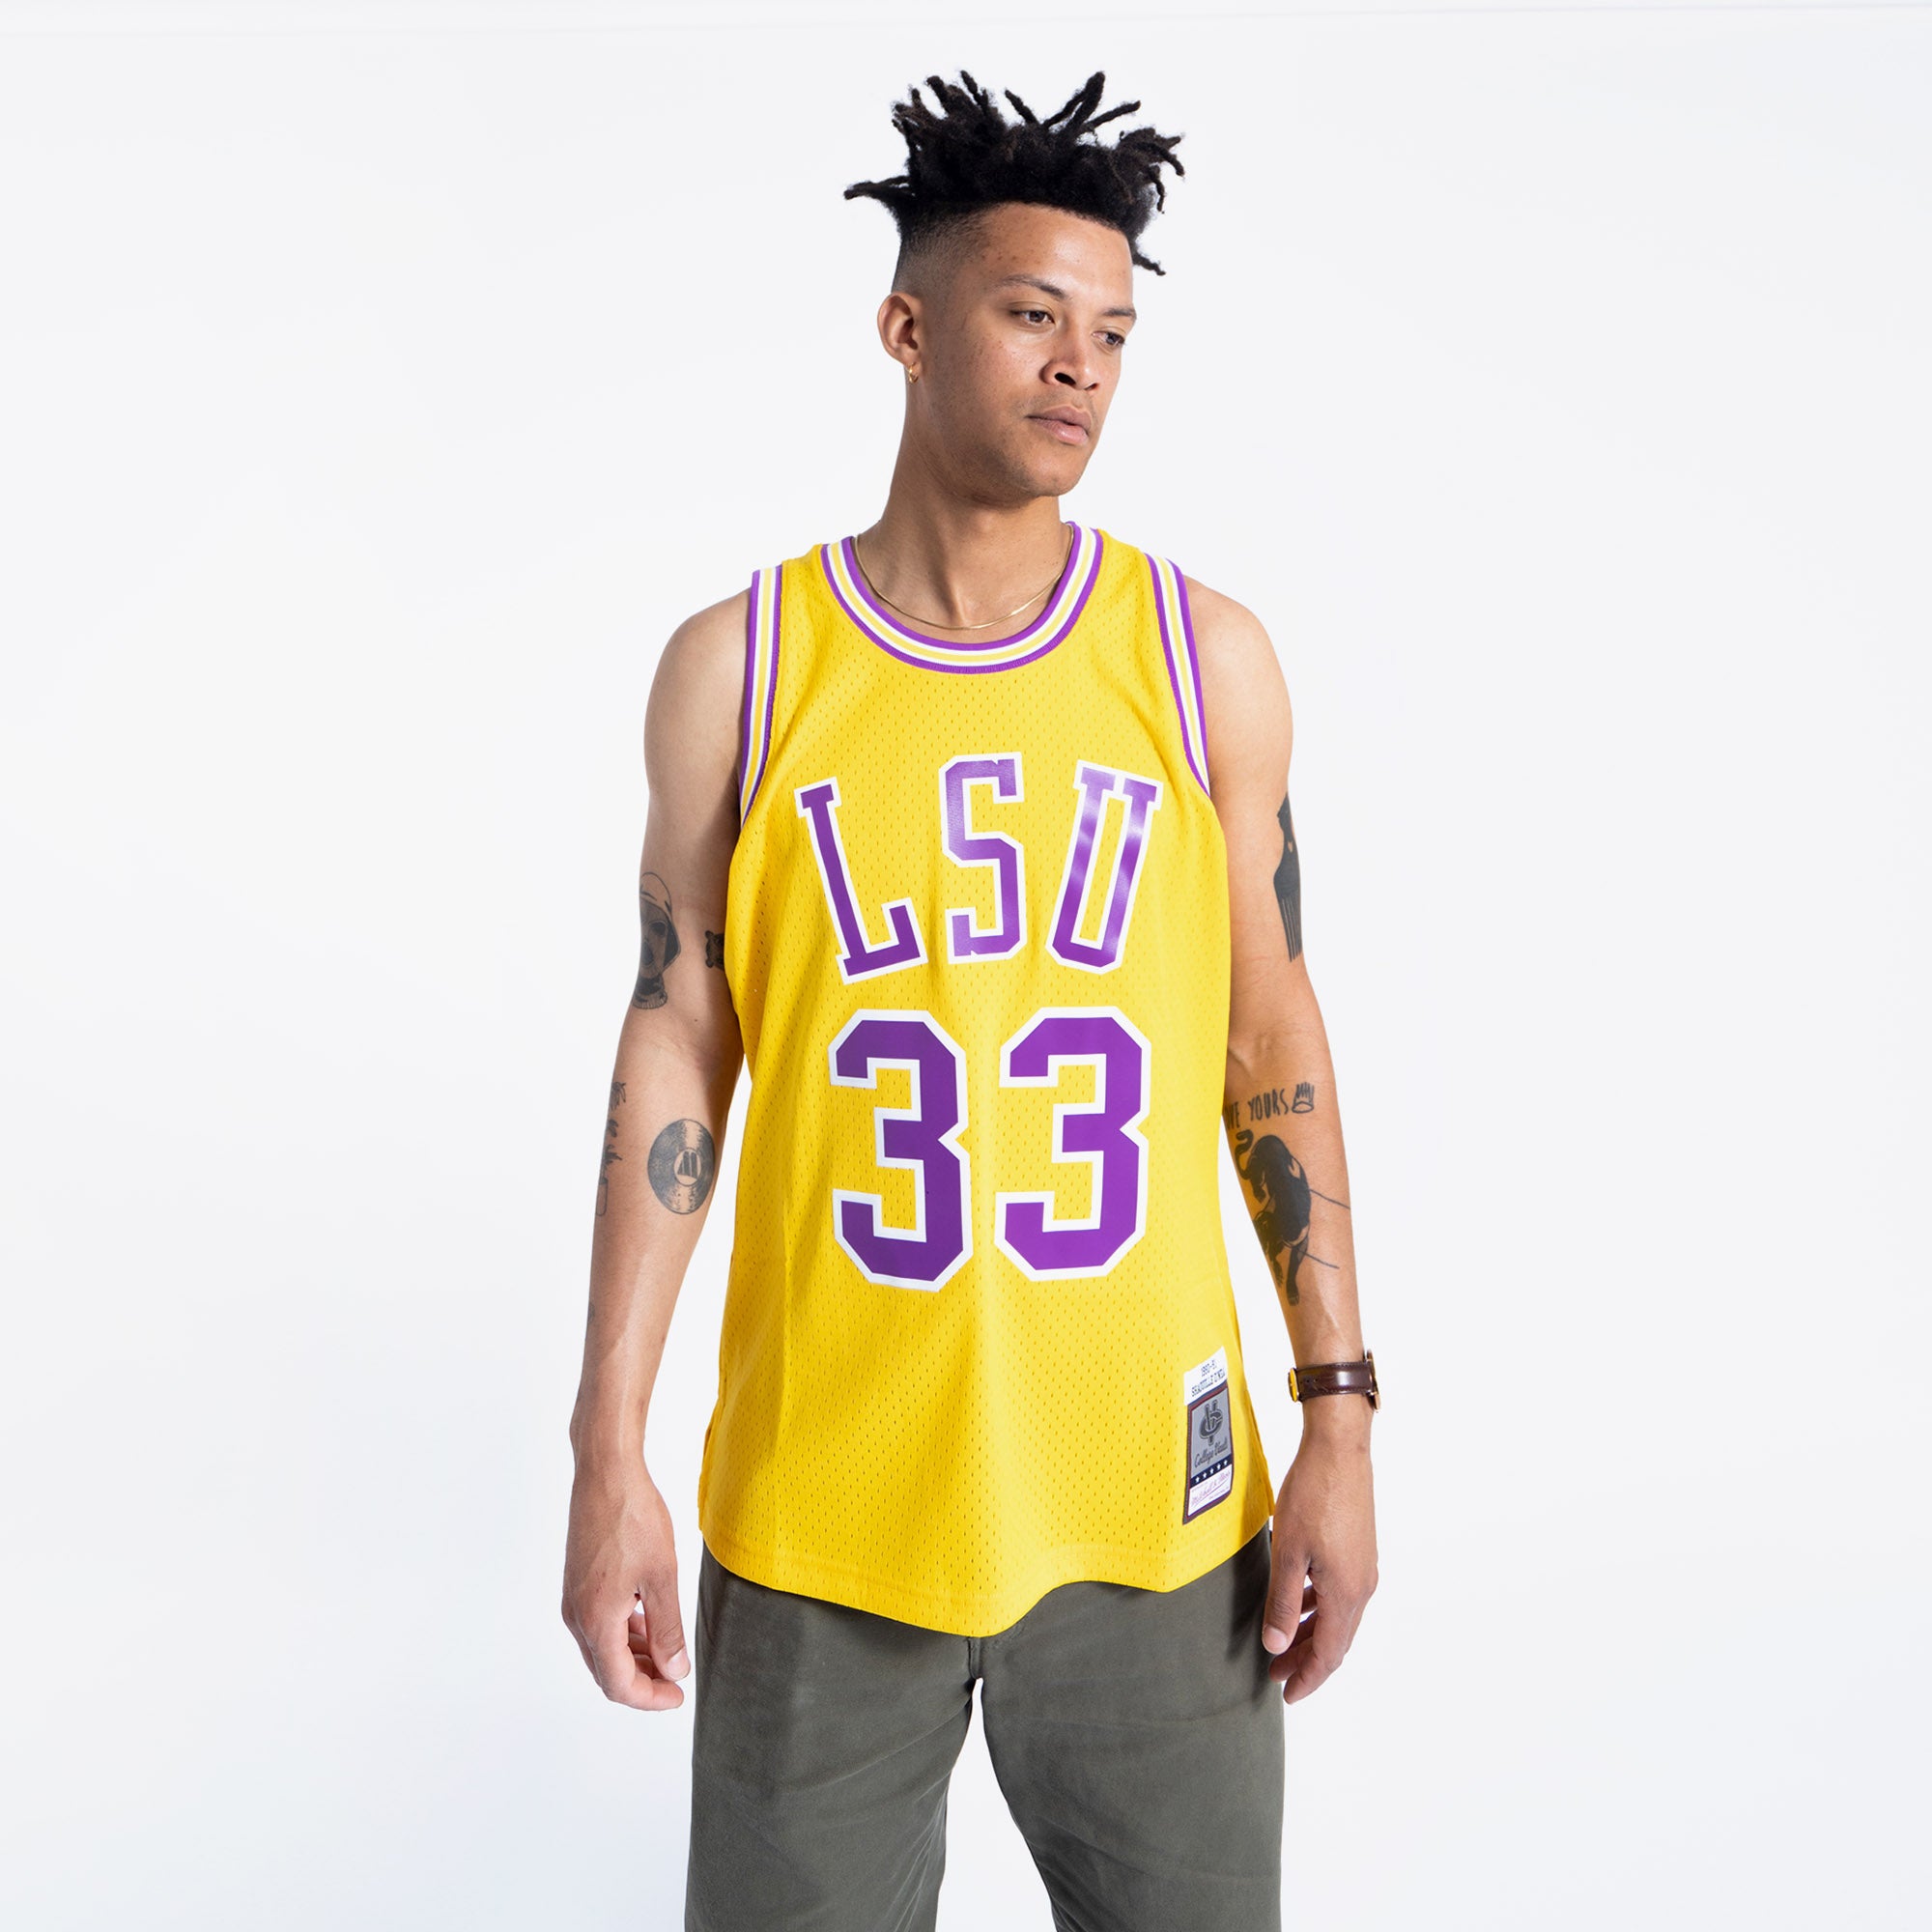 Shaq Jerseys - Officially Licensed Shaquille O'Neal Jerseys